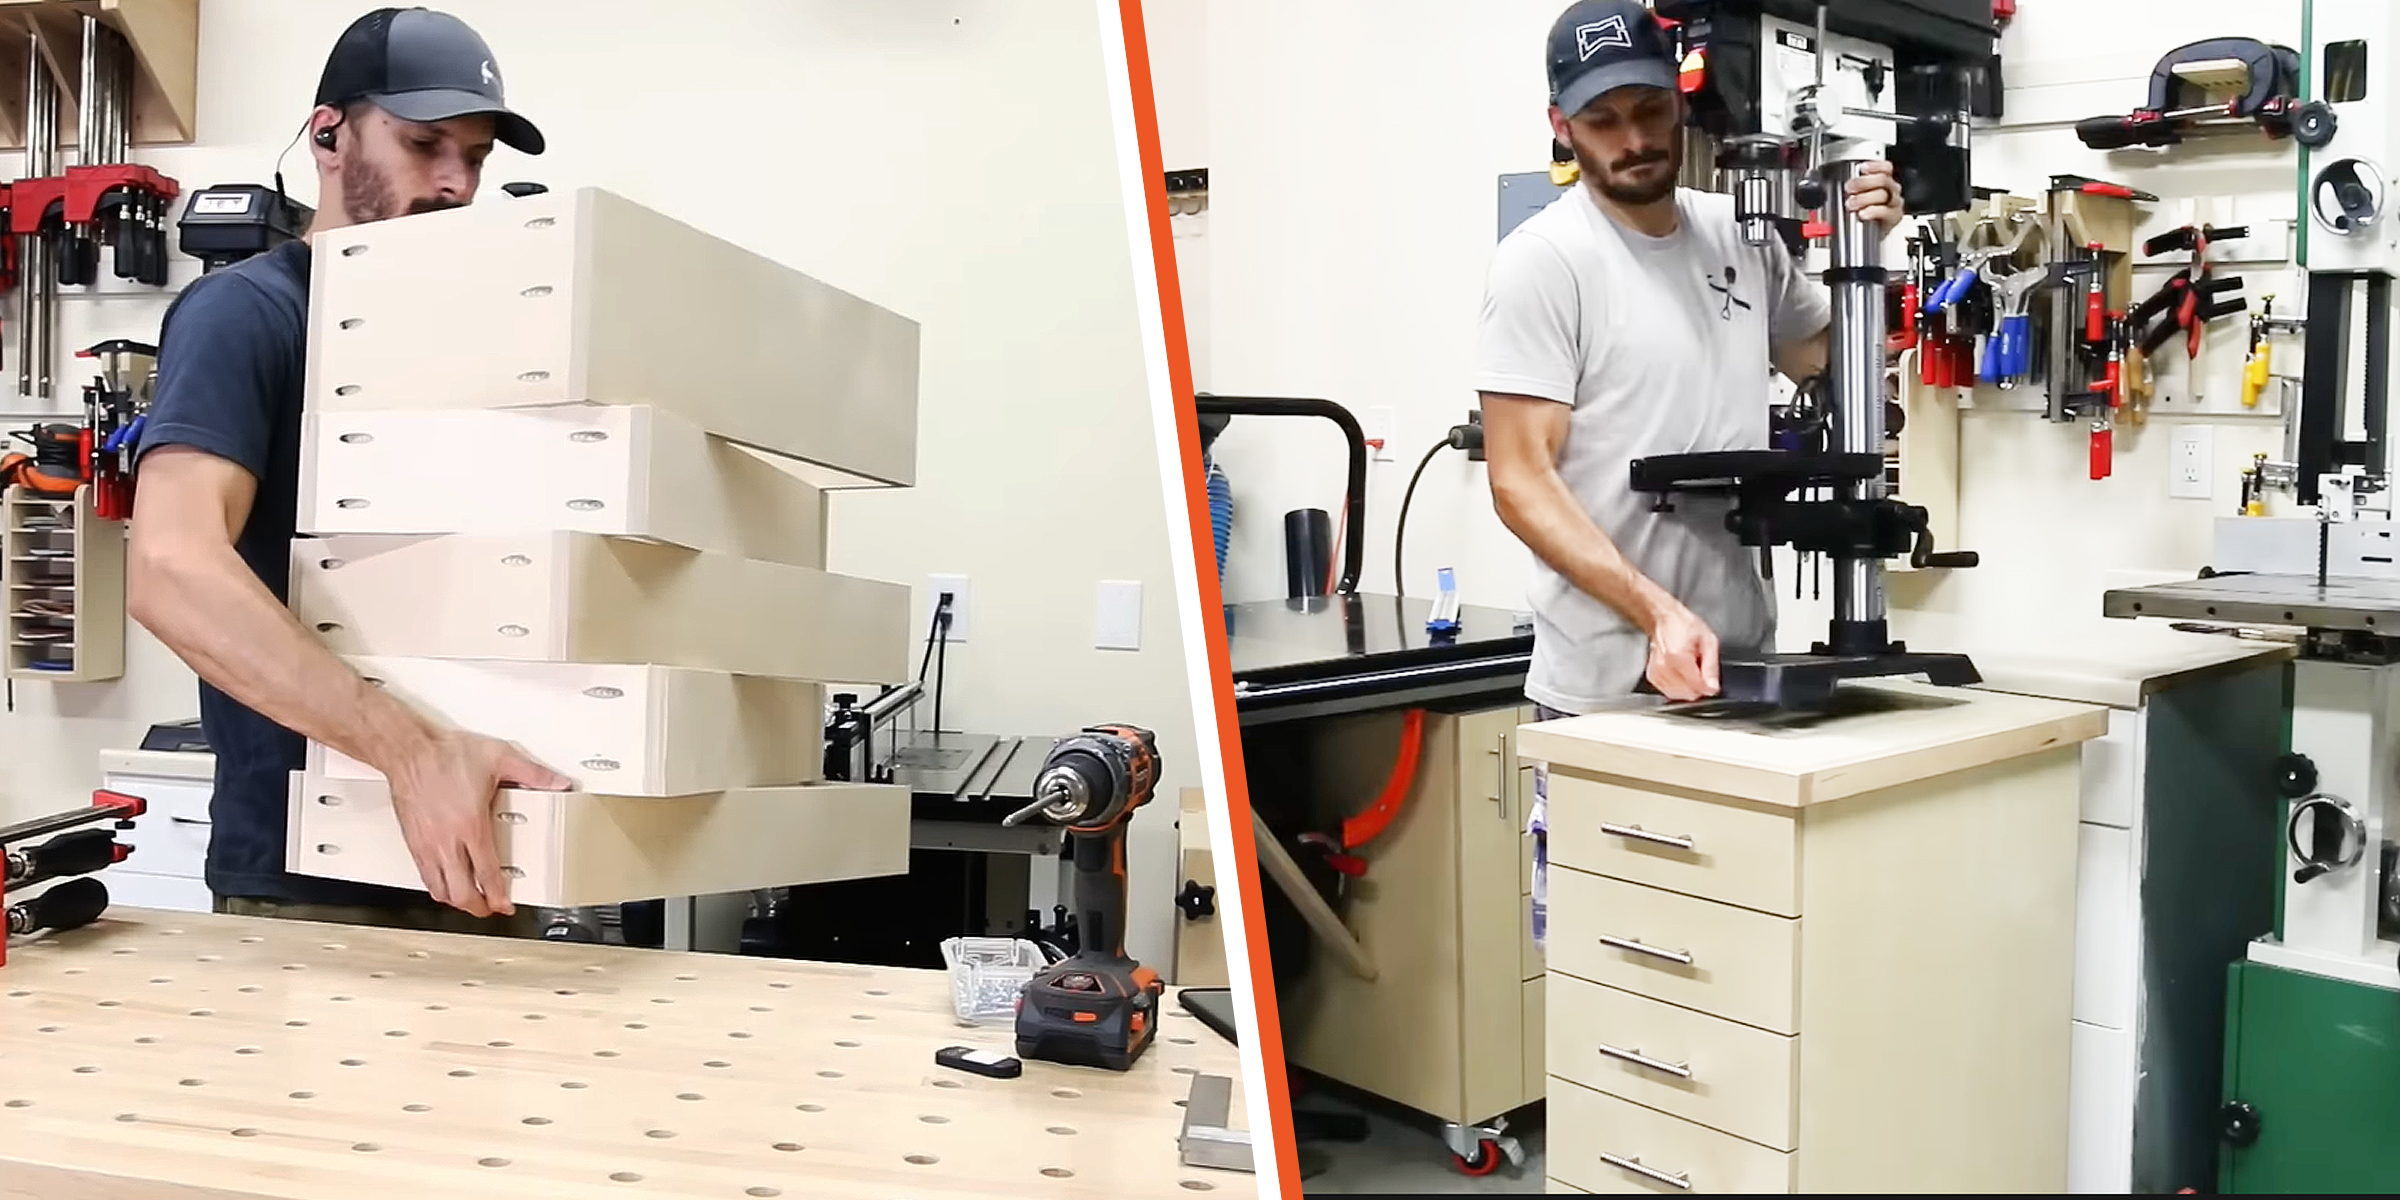 A man building a drill press stand | Source: YouTube/@Fixthisbuildthat